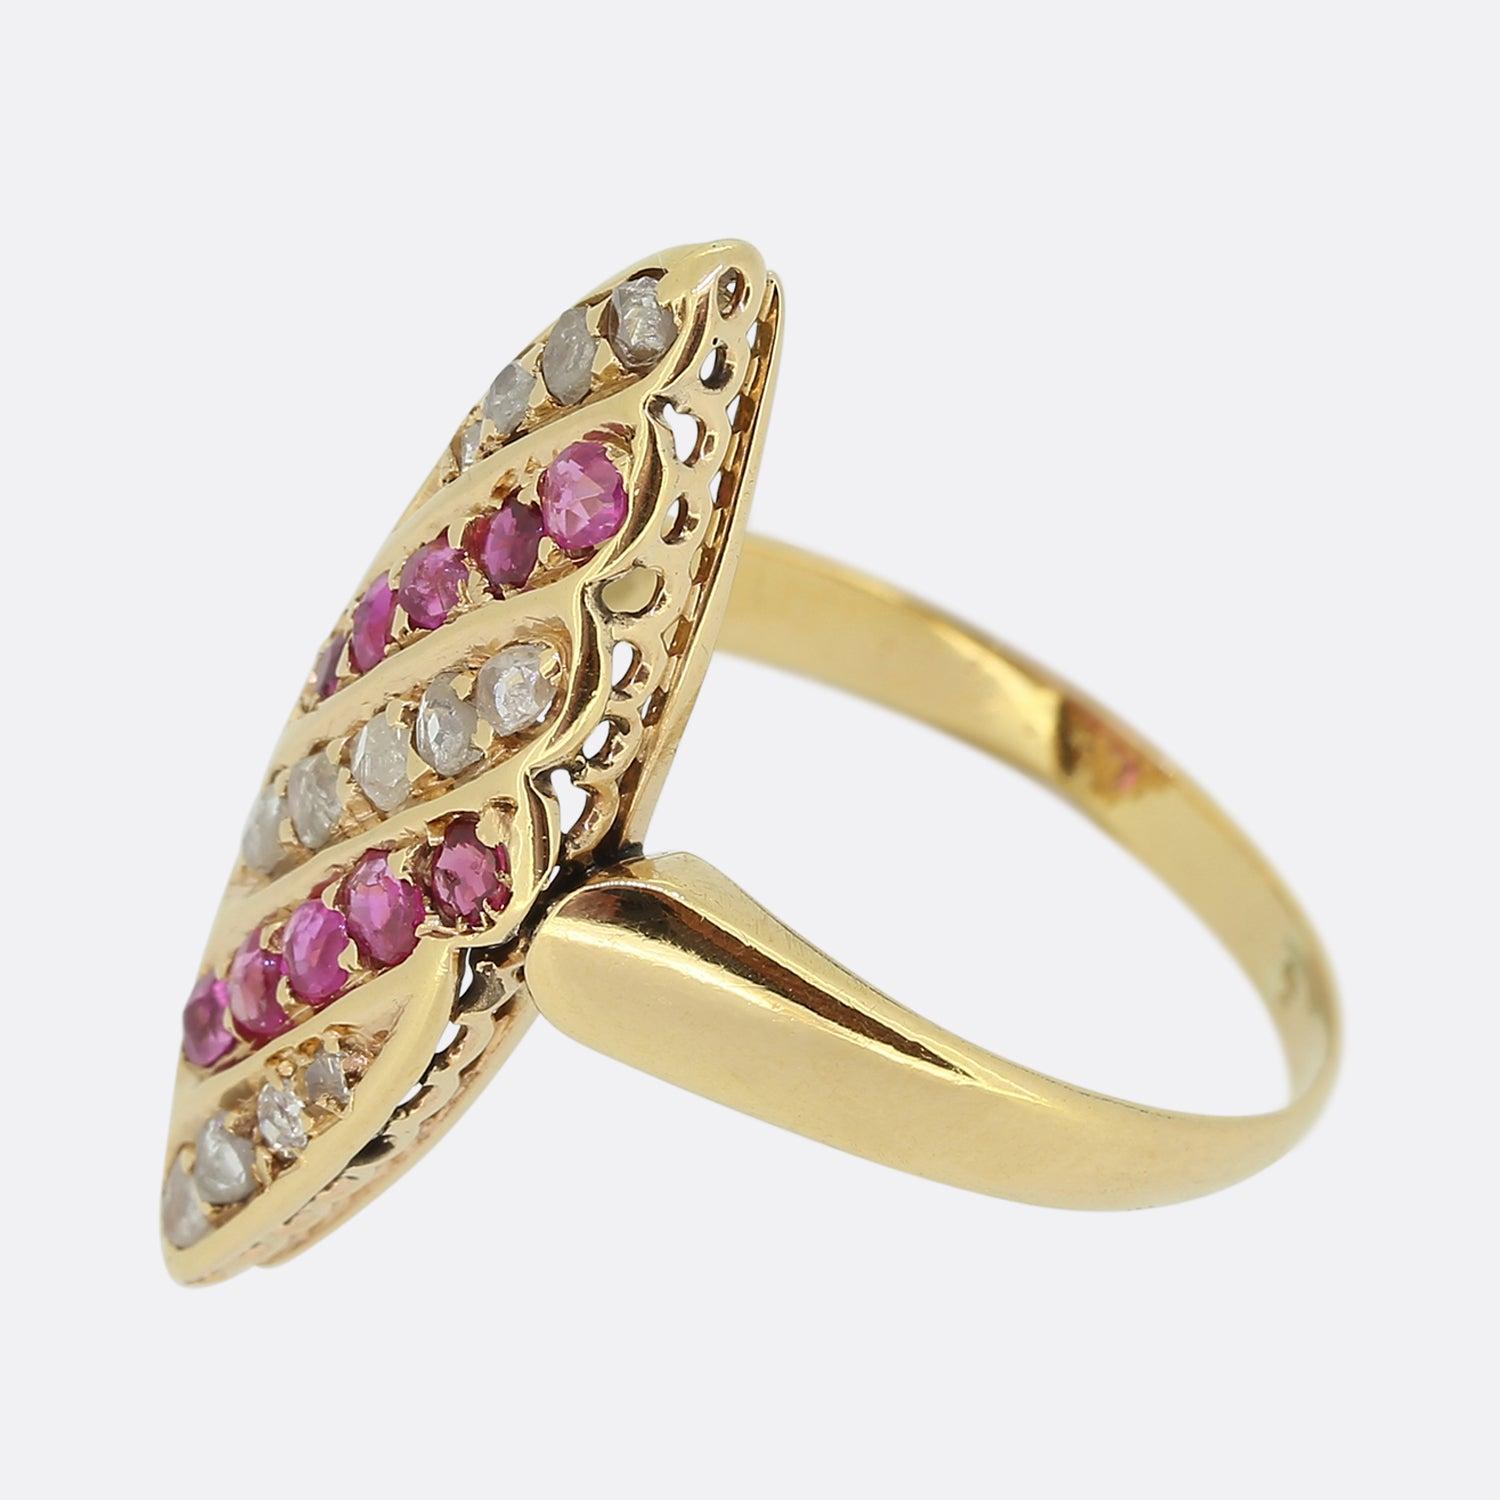 Here we have a gorgeous ruby and diamond navette ring from the Victorian era. This piece's boat-like shaped face has been crafted from 18ct yellow gold and plays to five alternating diagonal rows of rose cut diamond and round faceted rubies